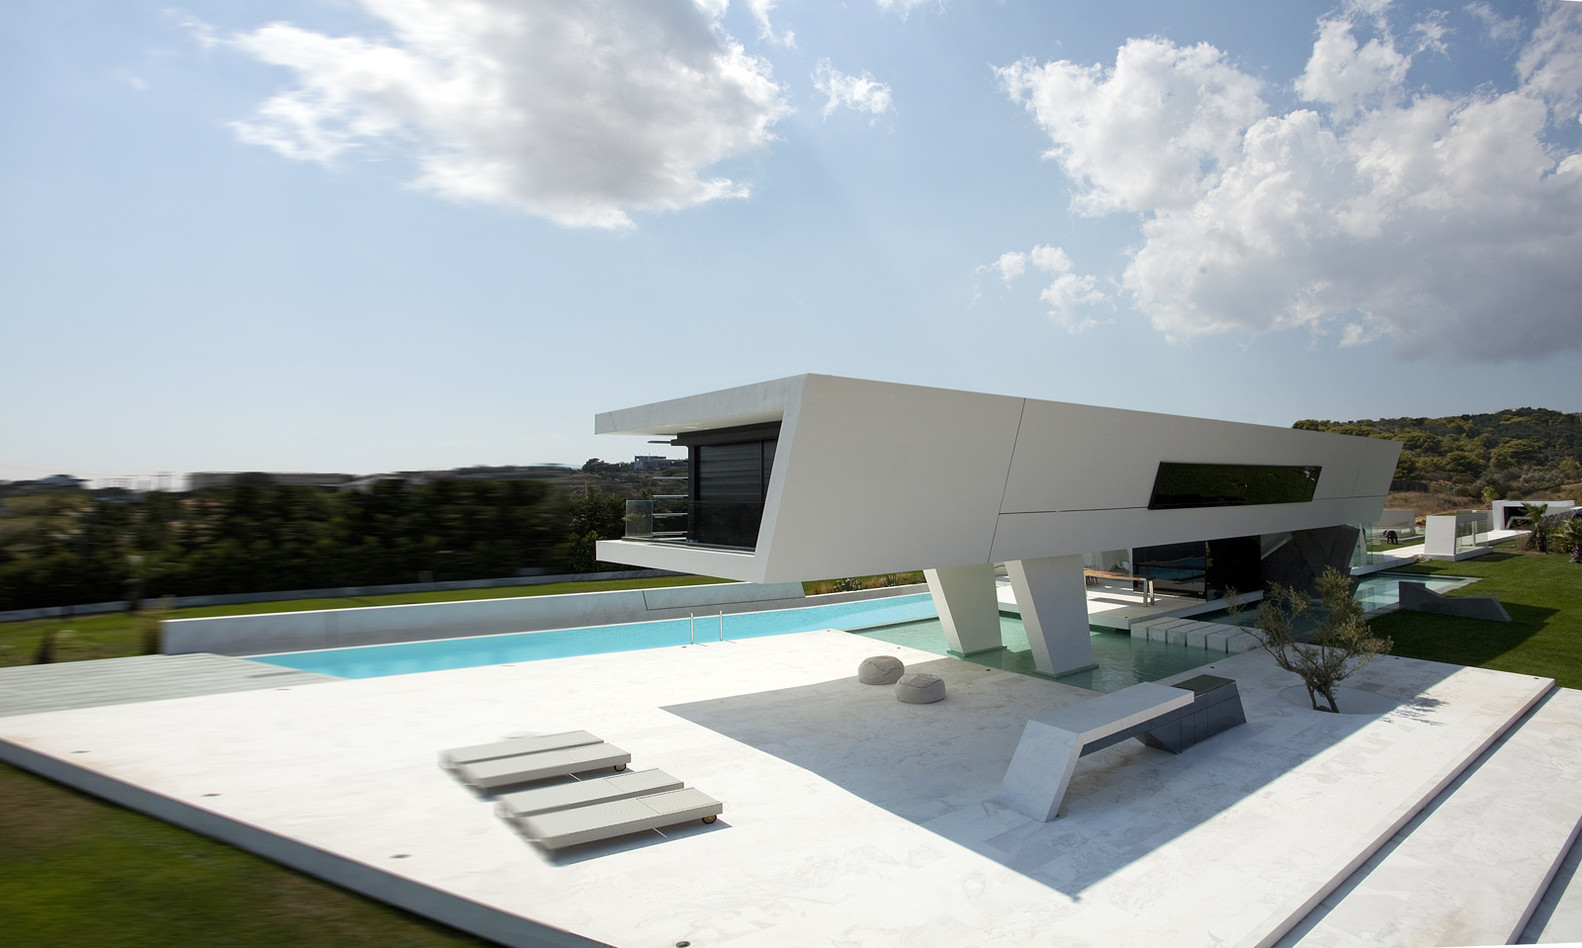 General 1582x948 house architecture modern swimming pool